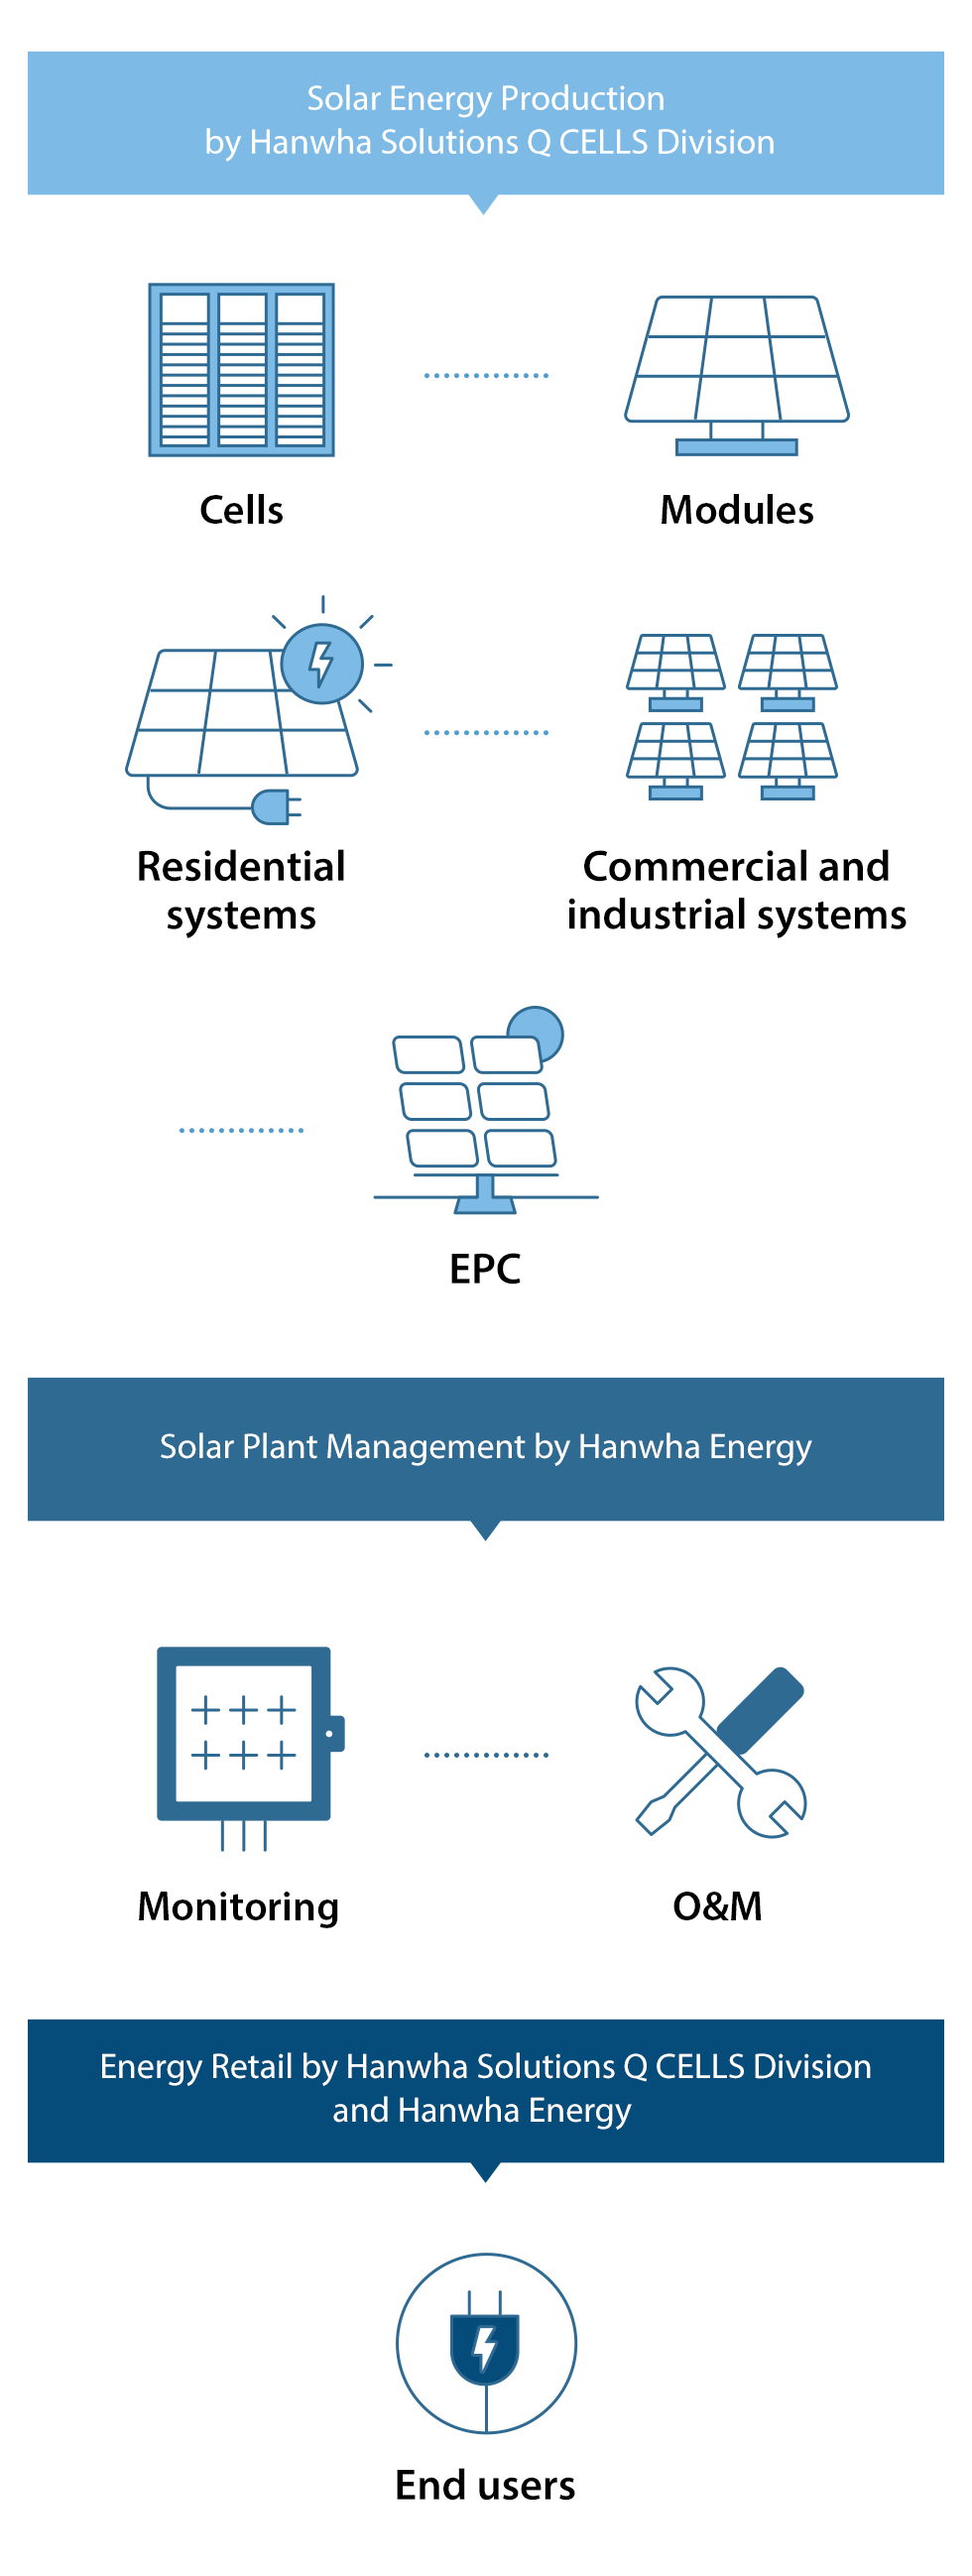 Hanwha Solutions's infrastructure ensures that energy value chains deliver renewable energy and reduce their carbon footprint